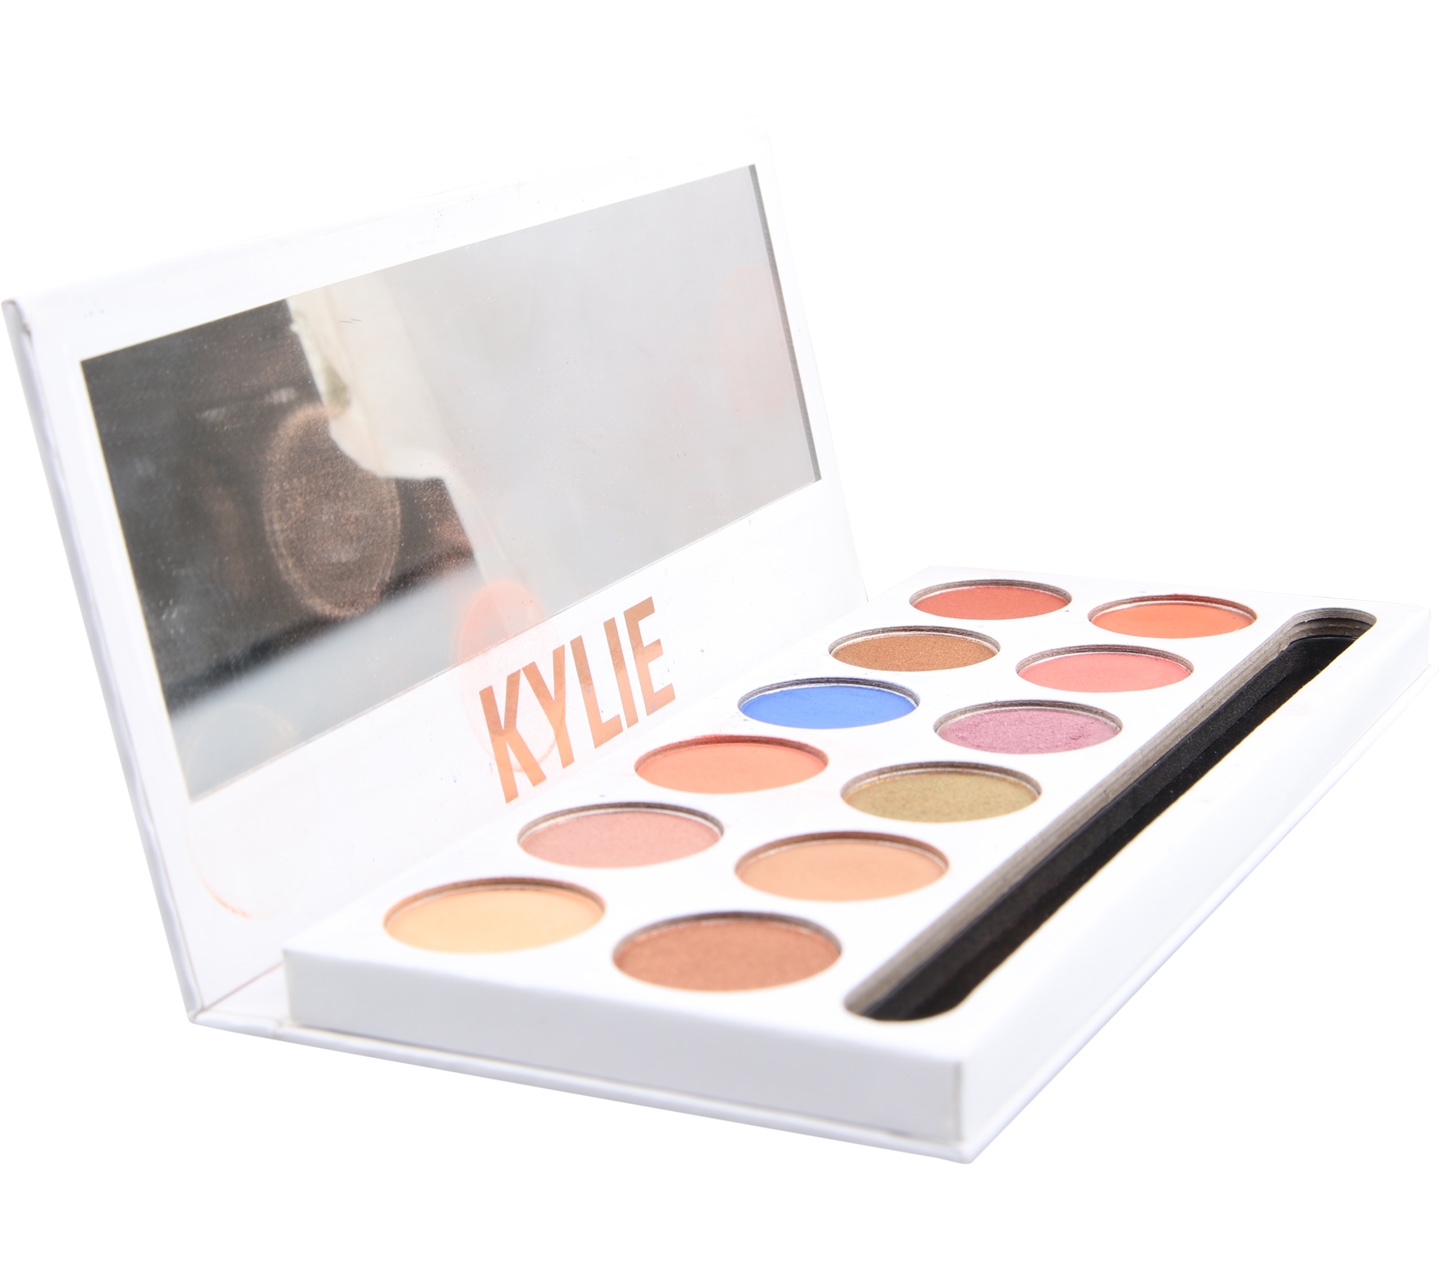 Kylie Cosmetics The Royal Peach Palette Sets and Palette